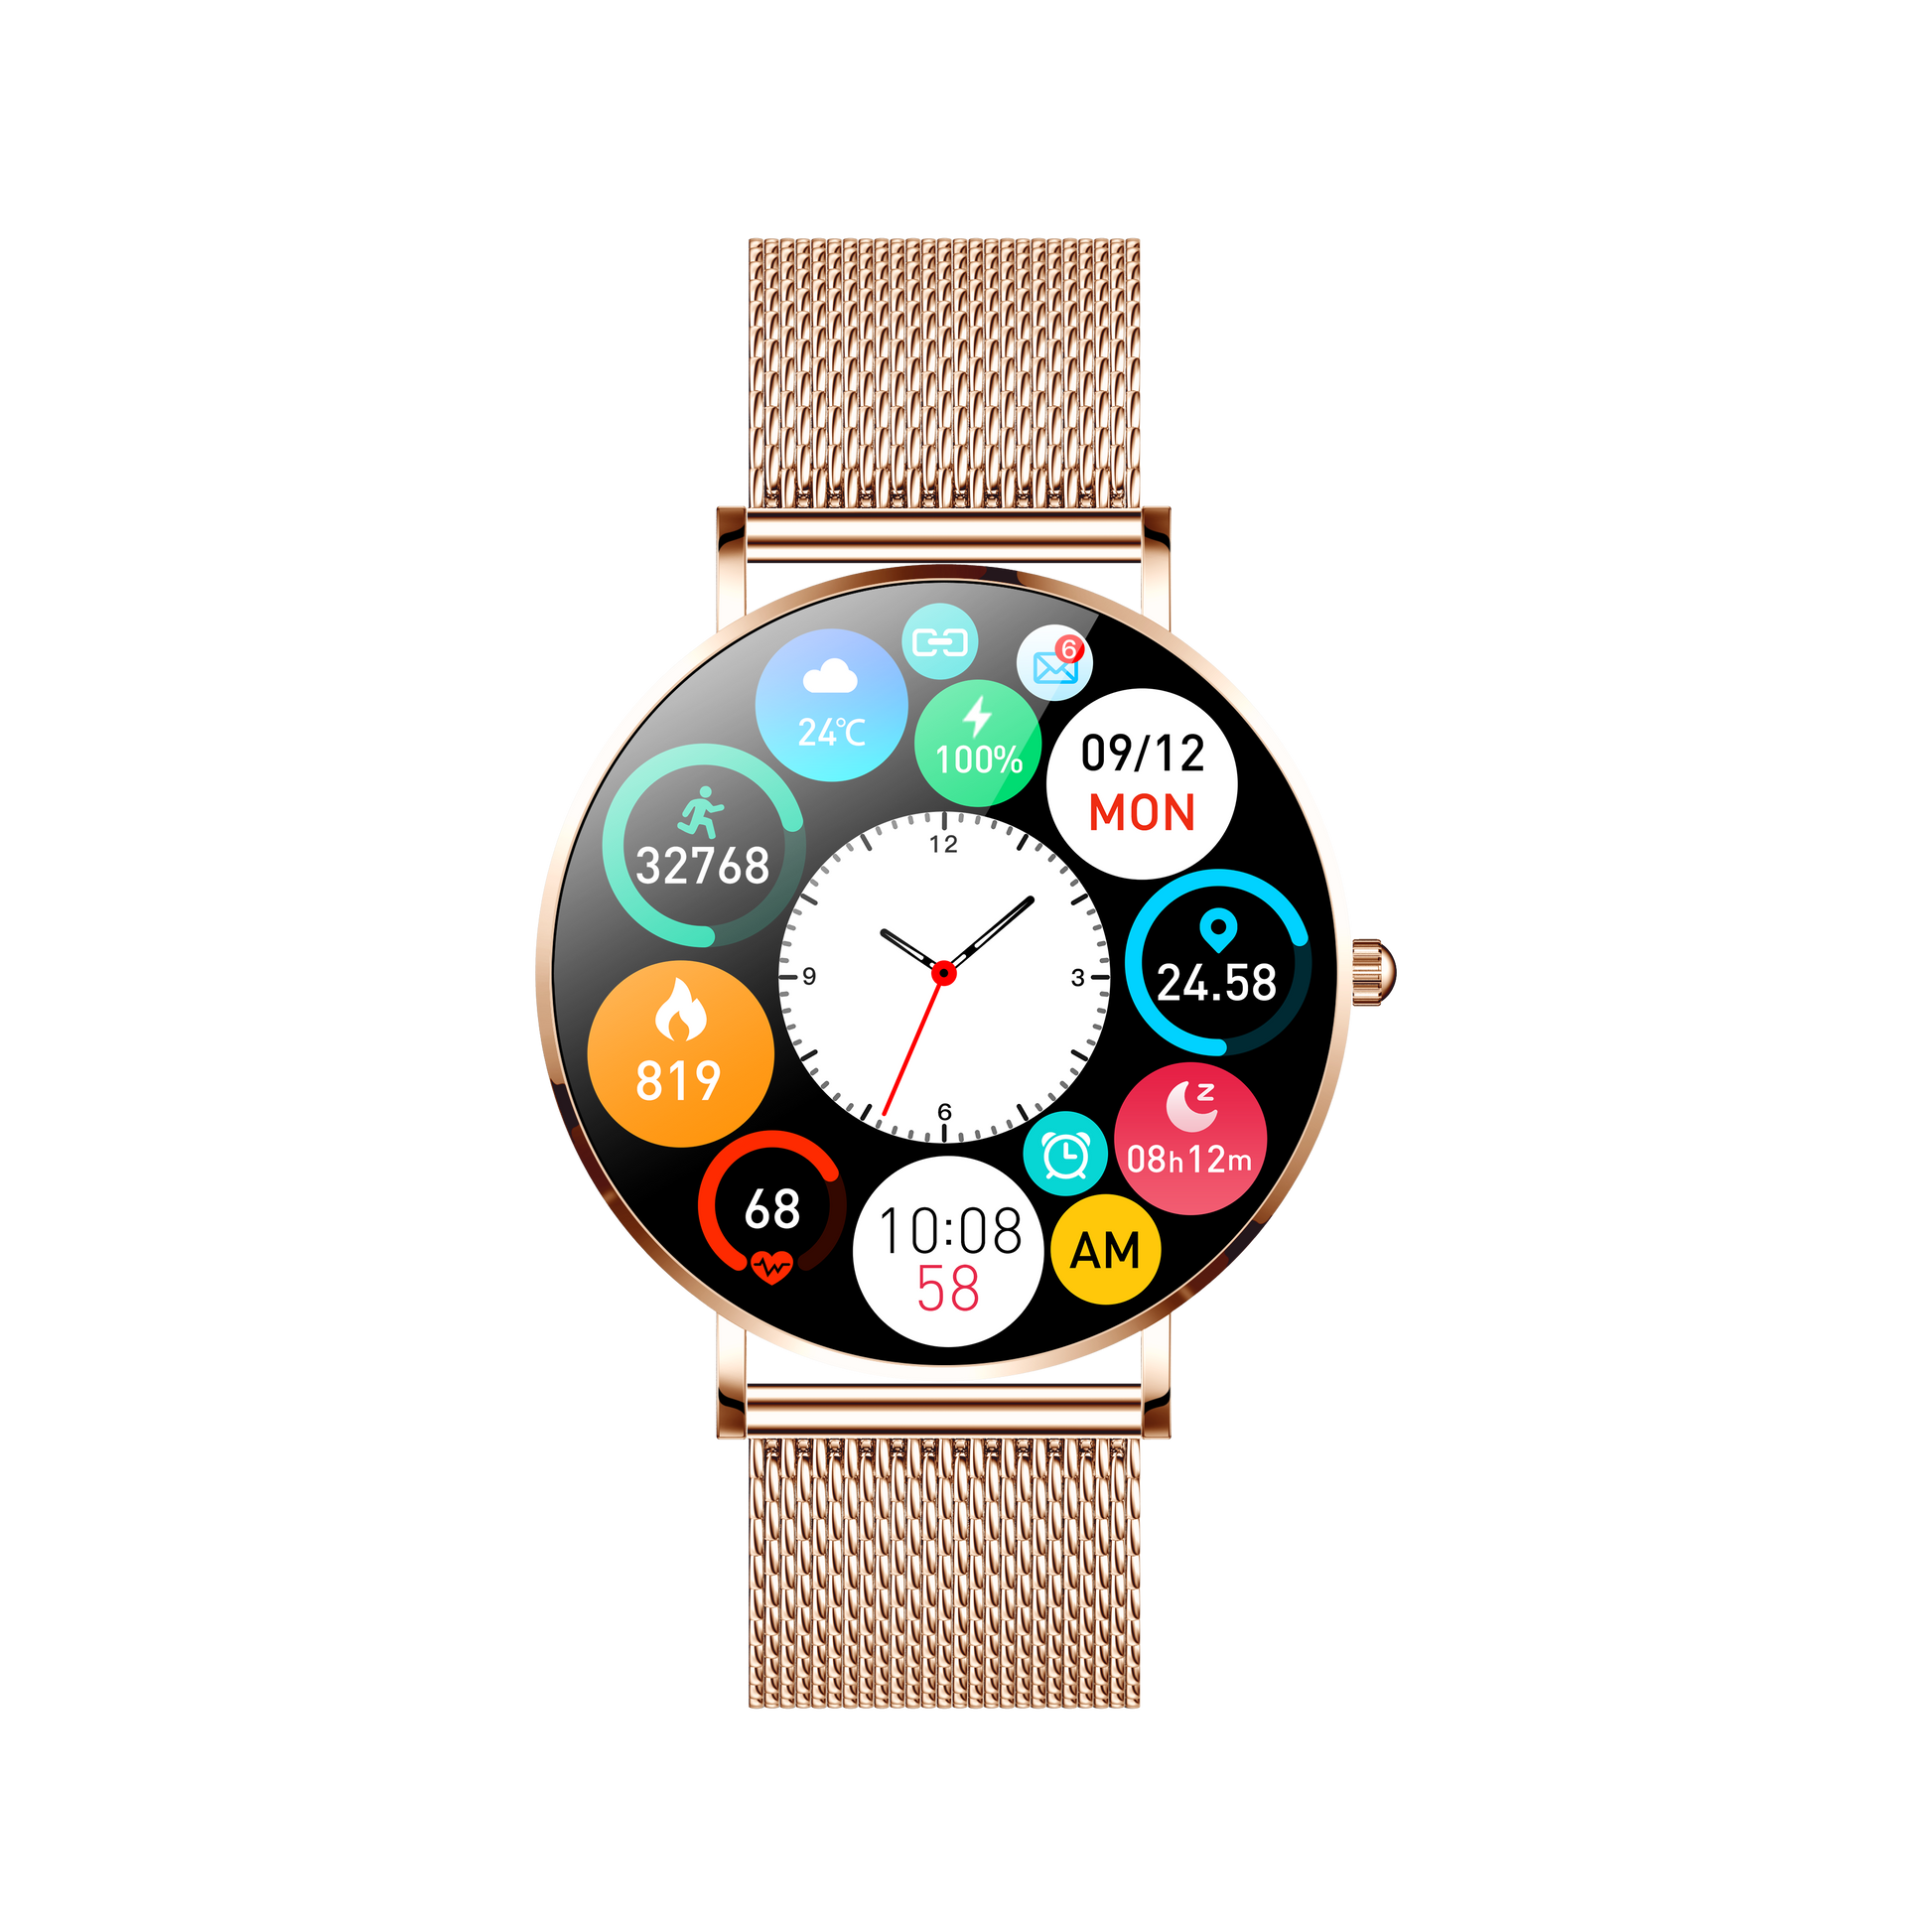 Dagnet ST08 Smartwatch 1.3-Inch Full Touch Screen Gold front view